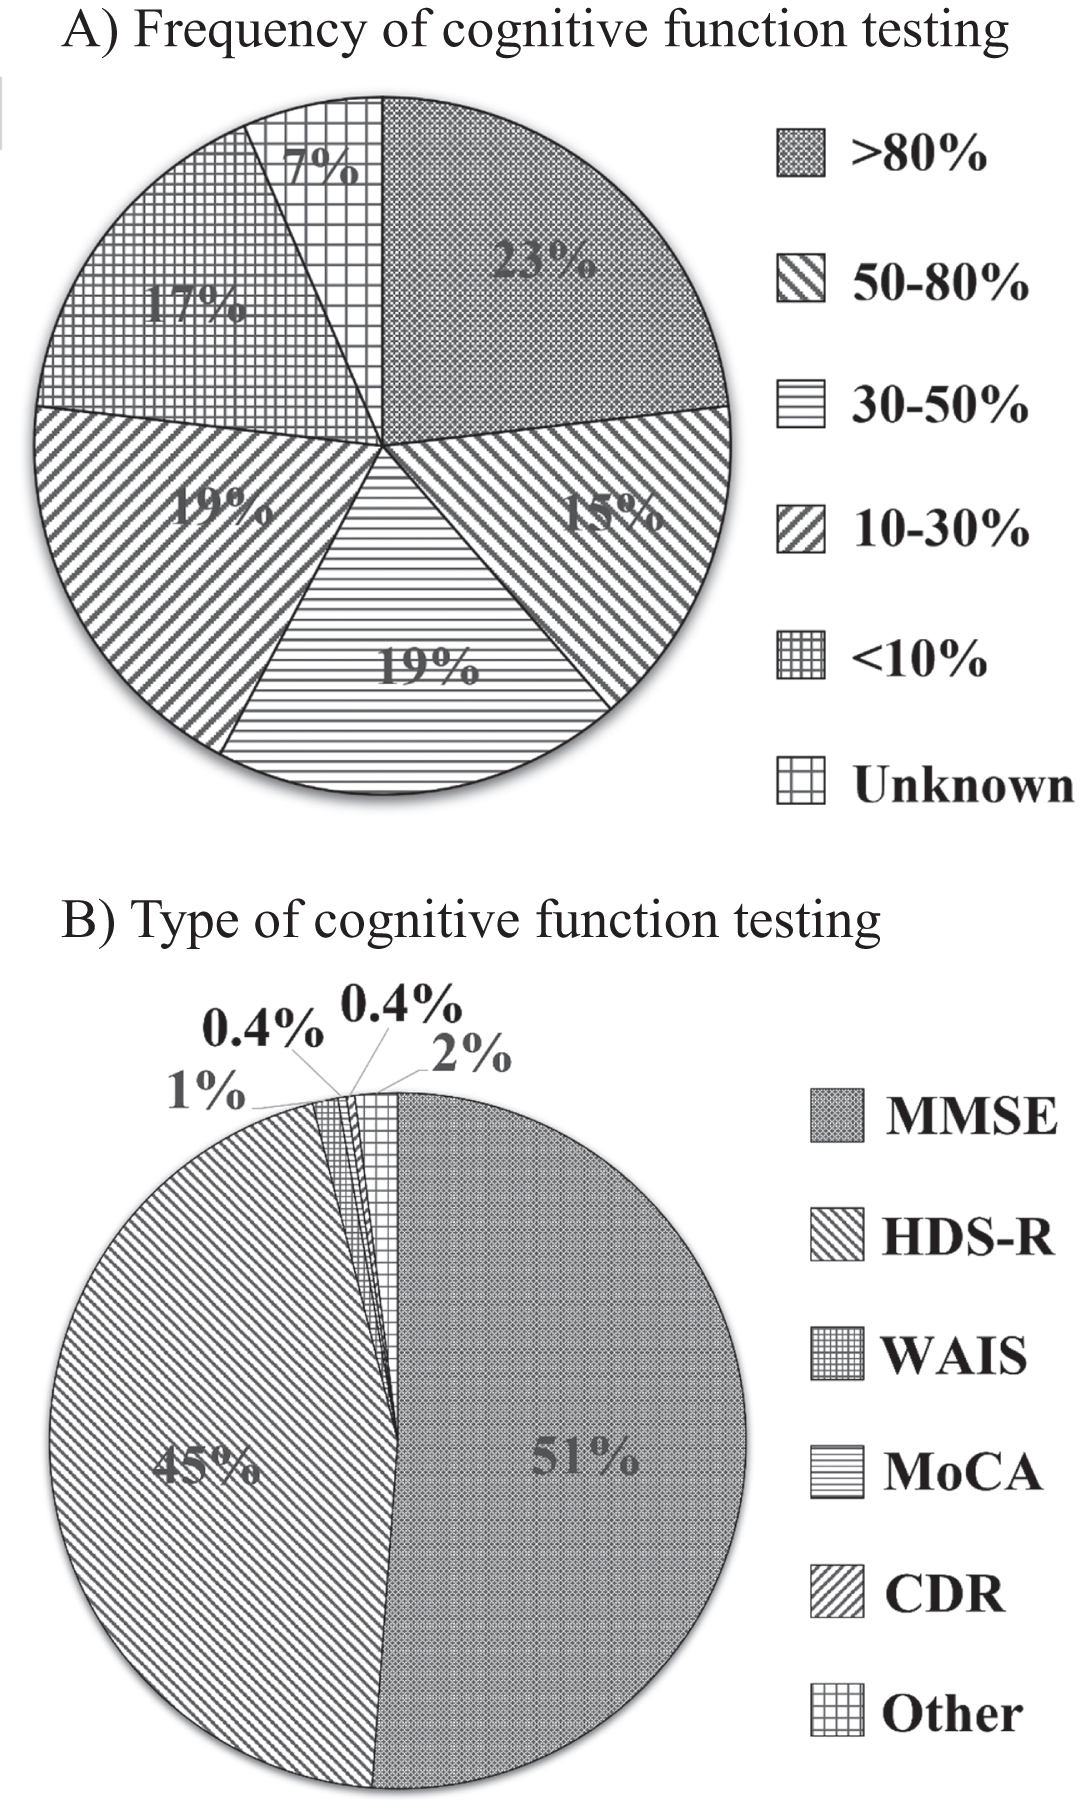 Cognitive function testing. A) As regards cognitive function testing after stroke, the proportion of stroke survivors who were administered objective cognitive function tests was > 80% (23.2%), 50–80% (15.4%), 30–50% (19.1%), 10–30% (19.1%), <10% (16.7%), and unknown (6.5%). B) MMSE (51.2%), and HDS-R (44.9%) were mainly used to assess the cognition of stroke survivors. However, MoCA was significantly uncommon (0.4%) compared to MMSE (p < 0.01). MMSE, Mini-Mental State Examination; HDS-R, Hasegawa Dementia Scale-revised; MoCA, Montreal Cognitive Assessment; CDR, Clinical Dementia Rating; WAIS, Wechsler adult intelligence scale.